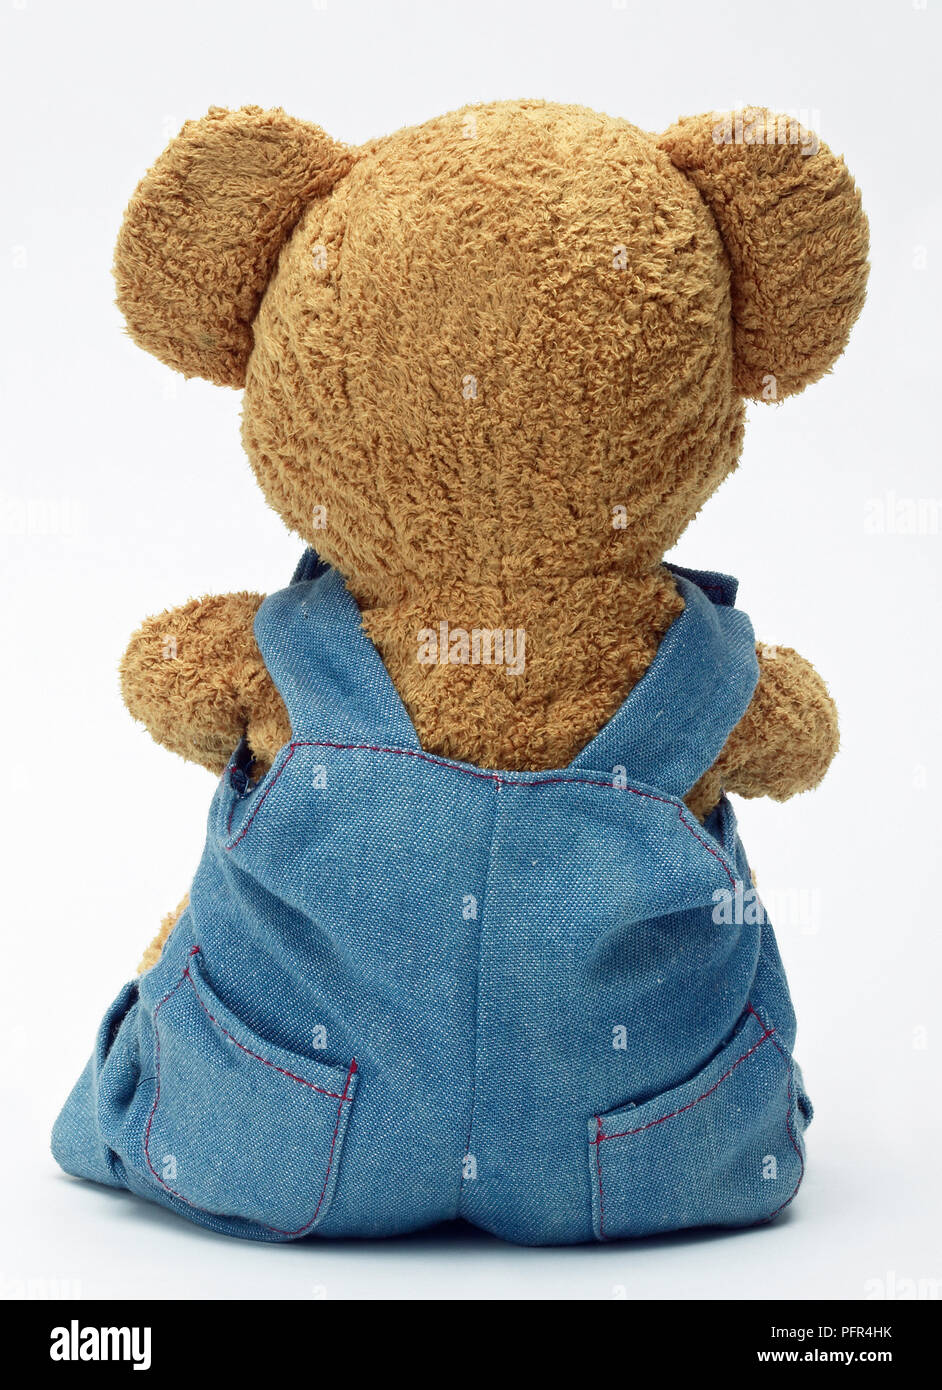 Teddy wearing blue dungarees, rear view Stock Photo